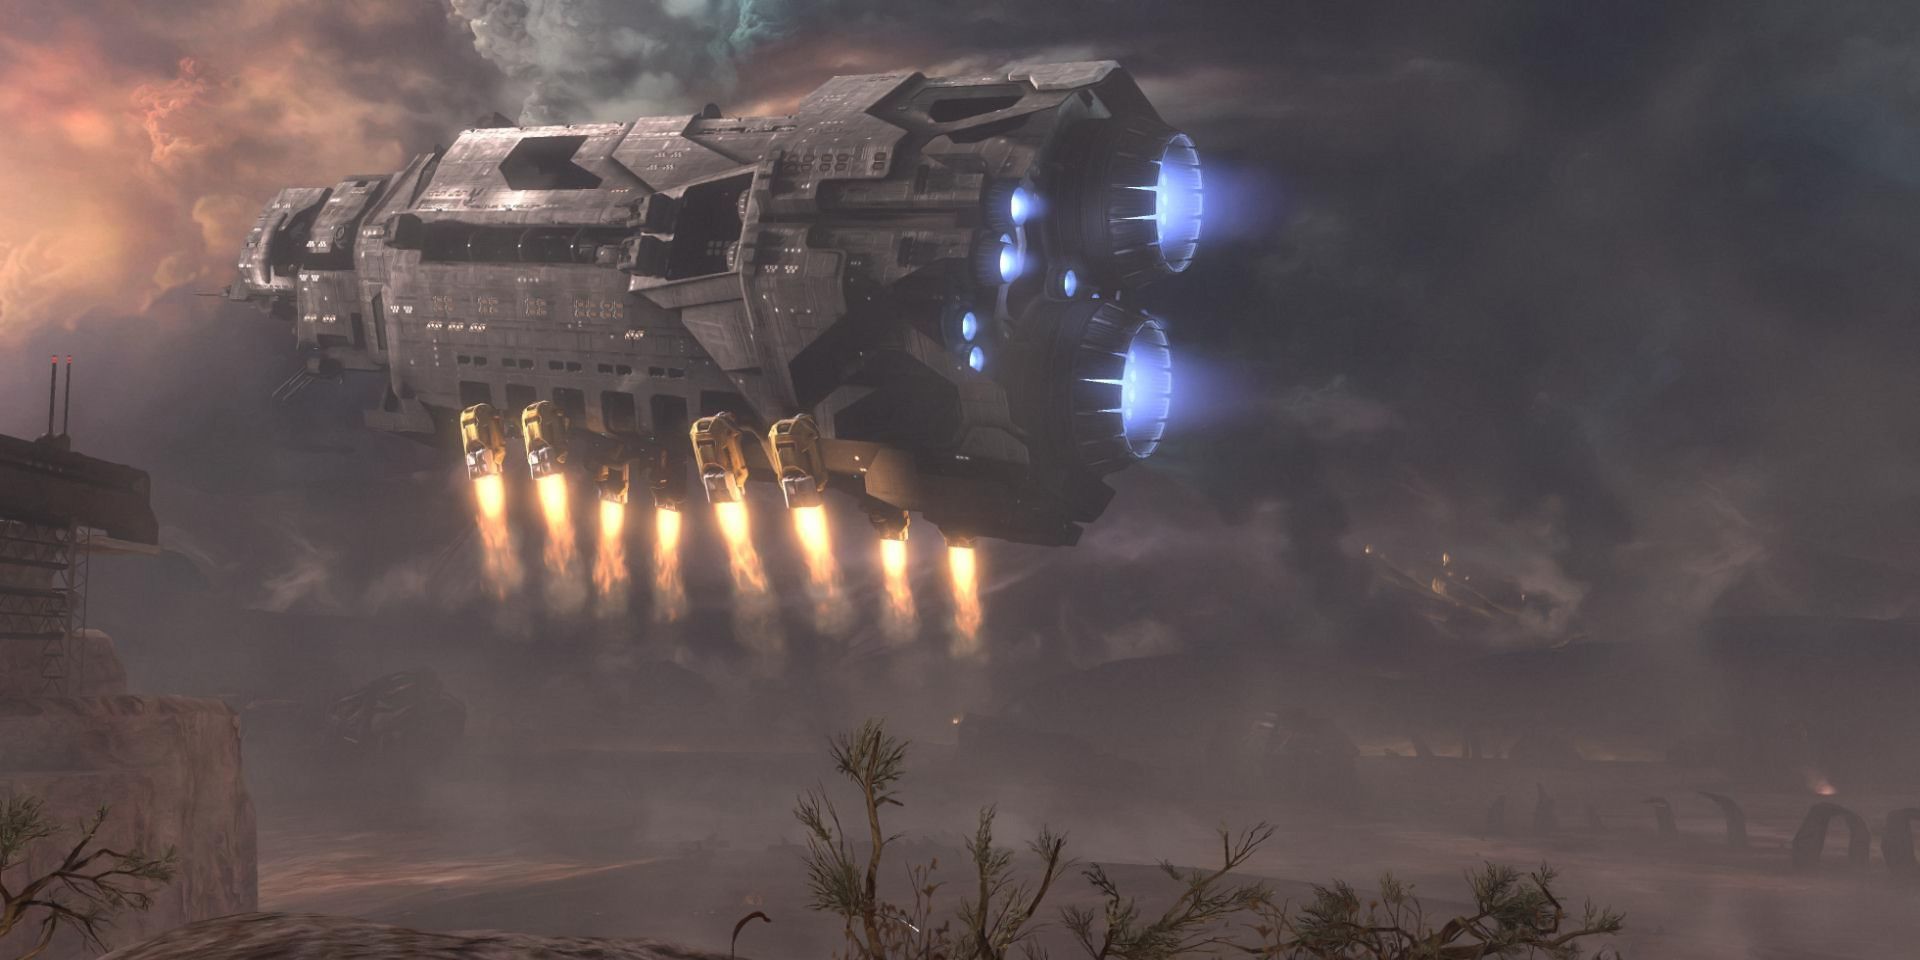 A large spaceship flying in Halo Reach